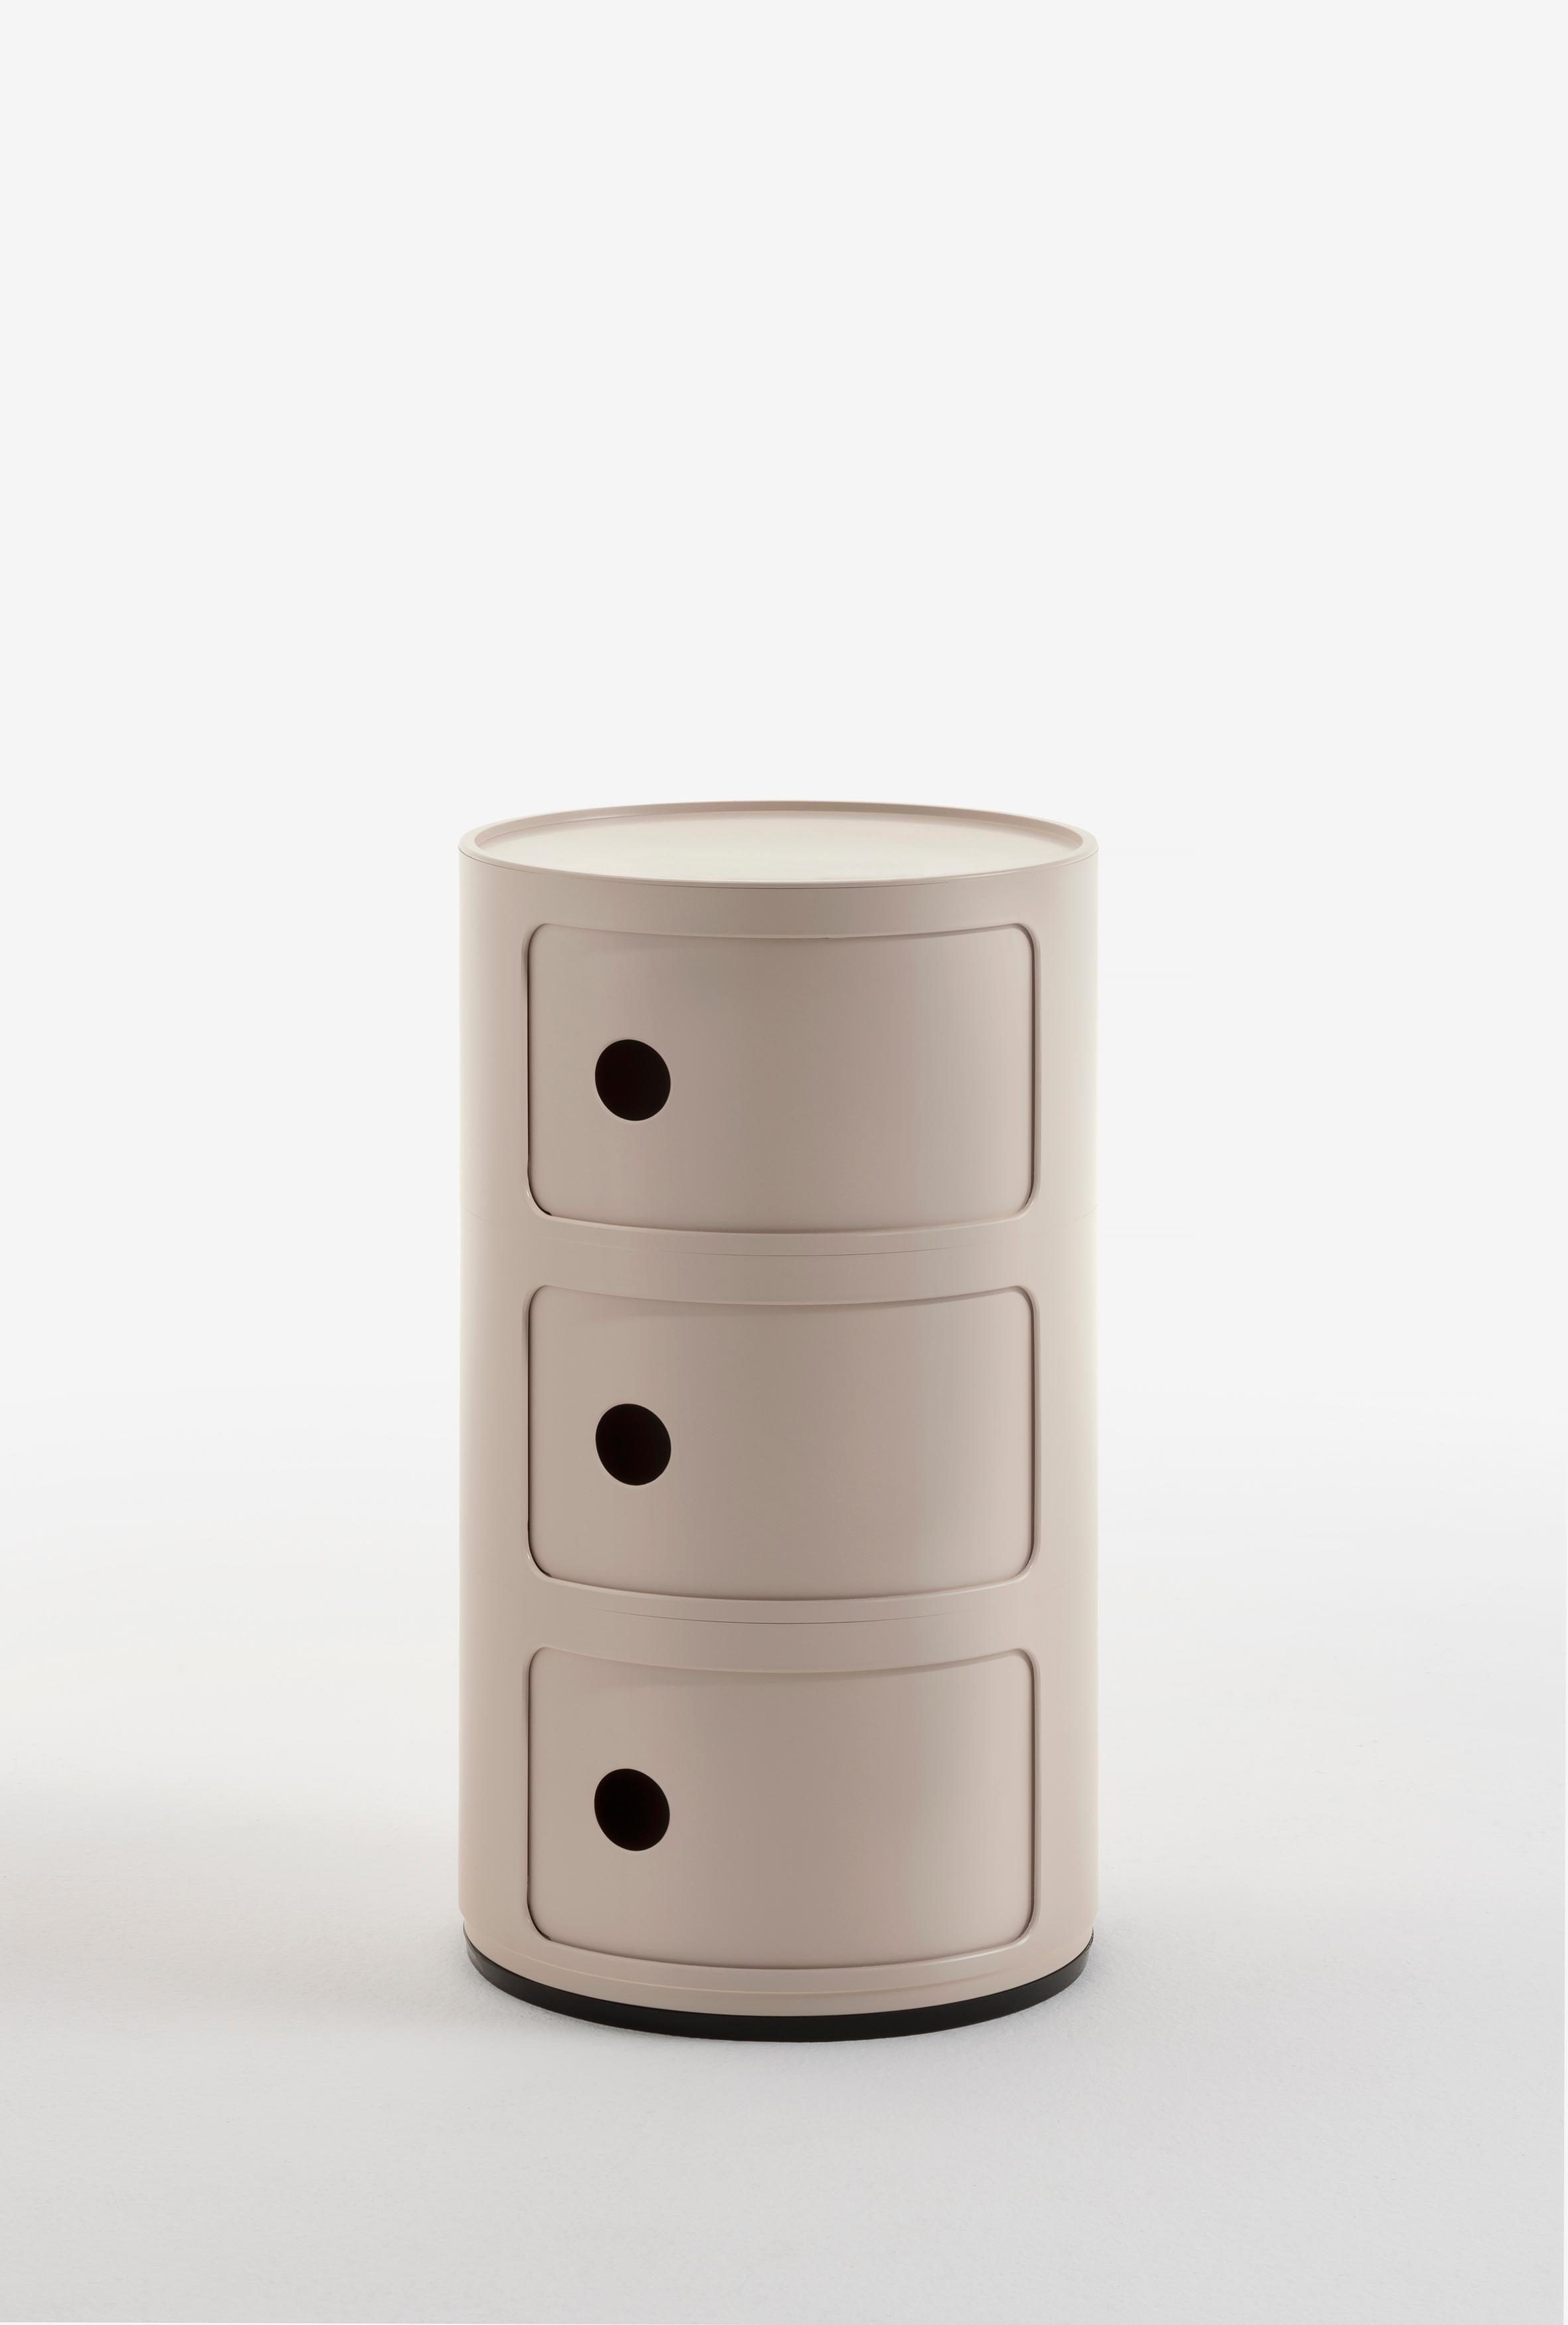 Componibili Bio in Cream by Anna Castelli Ferrieri for Kartell. The Componibili Bio storage unit was first created by Italian designer and Kartell co-founder Anna Castelli Ferrieri in the 1960s. At the time of its origin, the Componibili Bio was